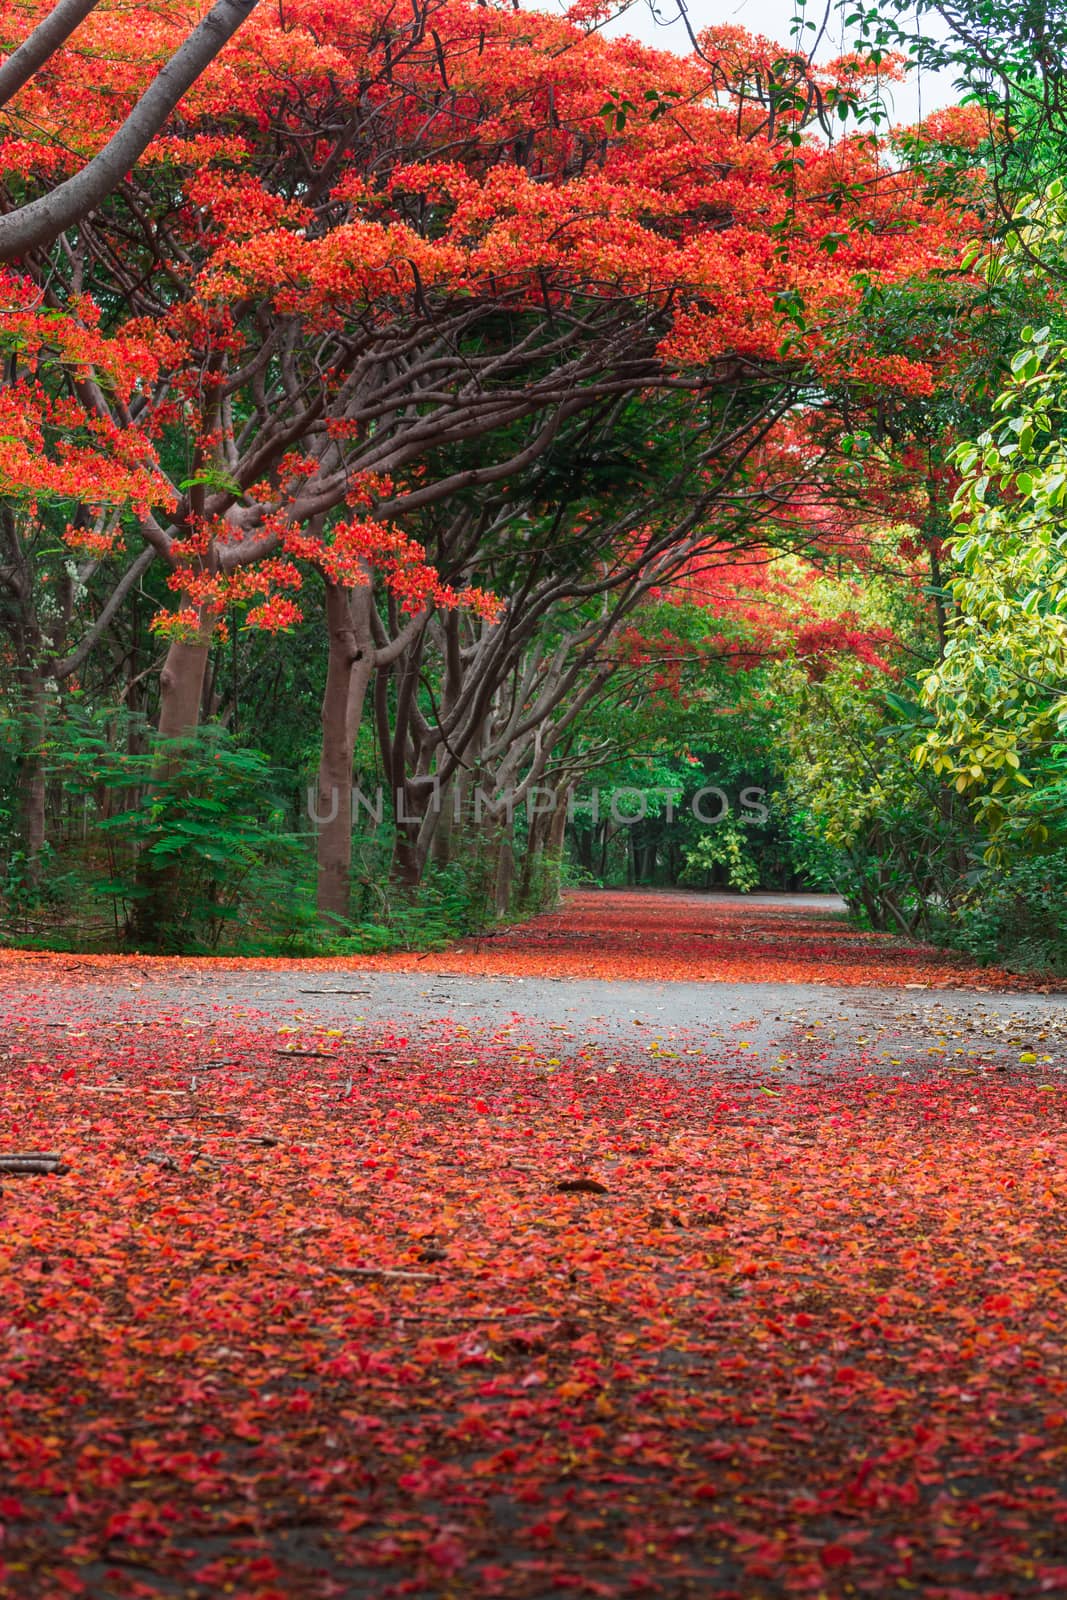 Scene of Flame Tree, Royal Poinciana by thampapon